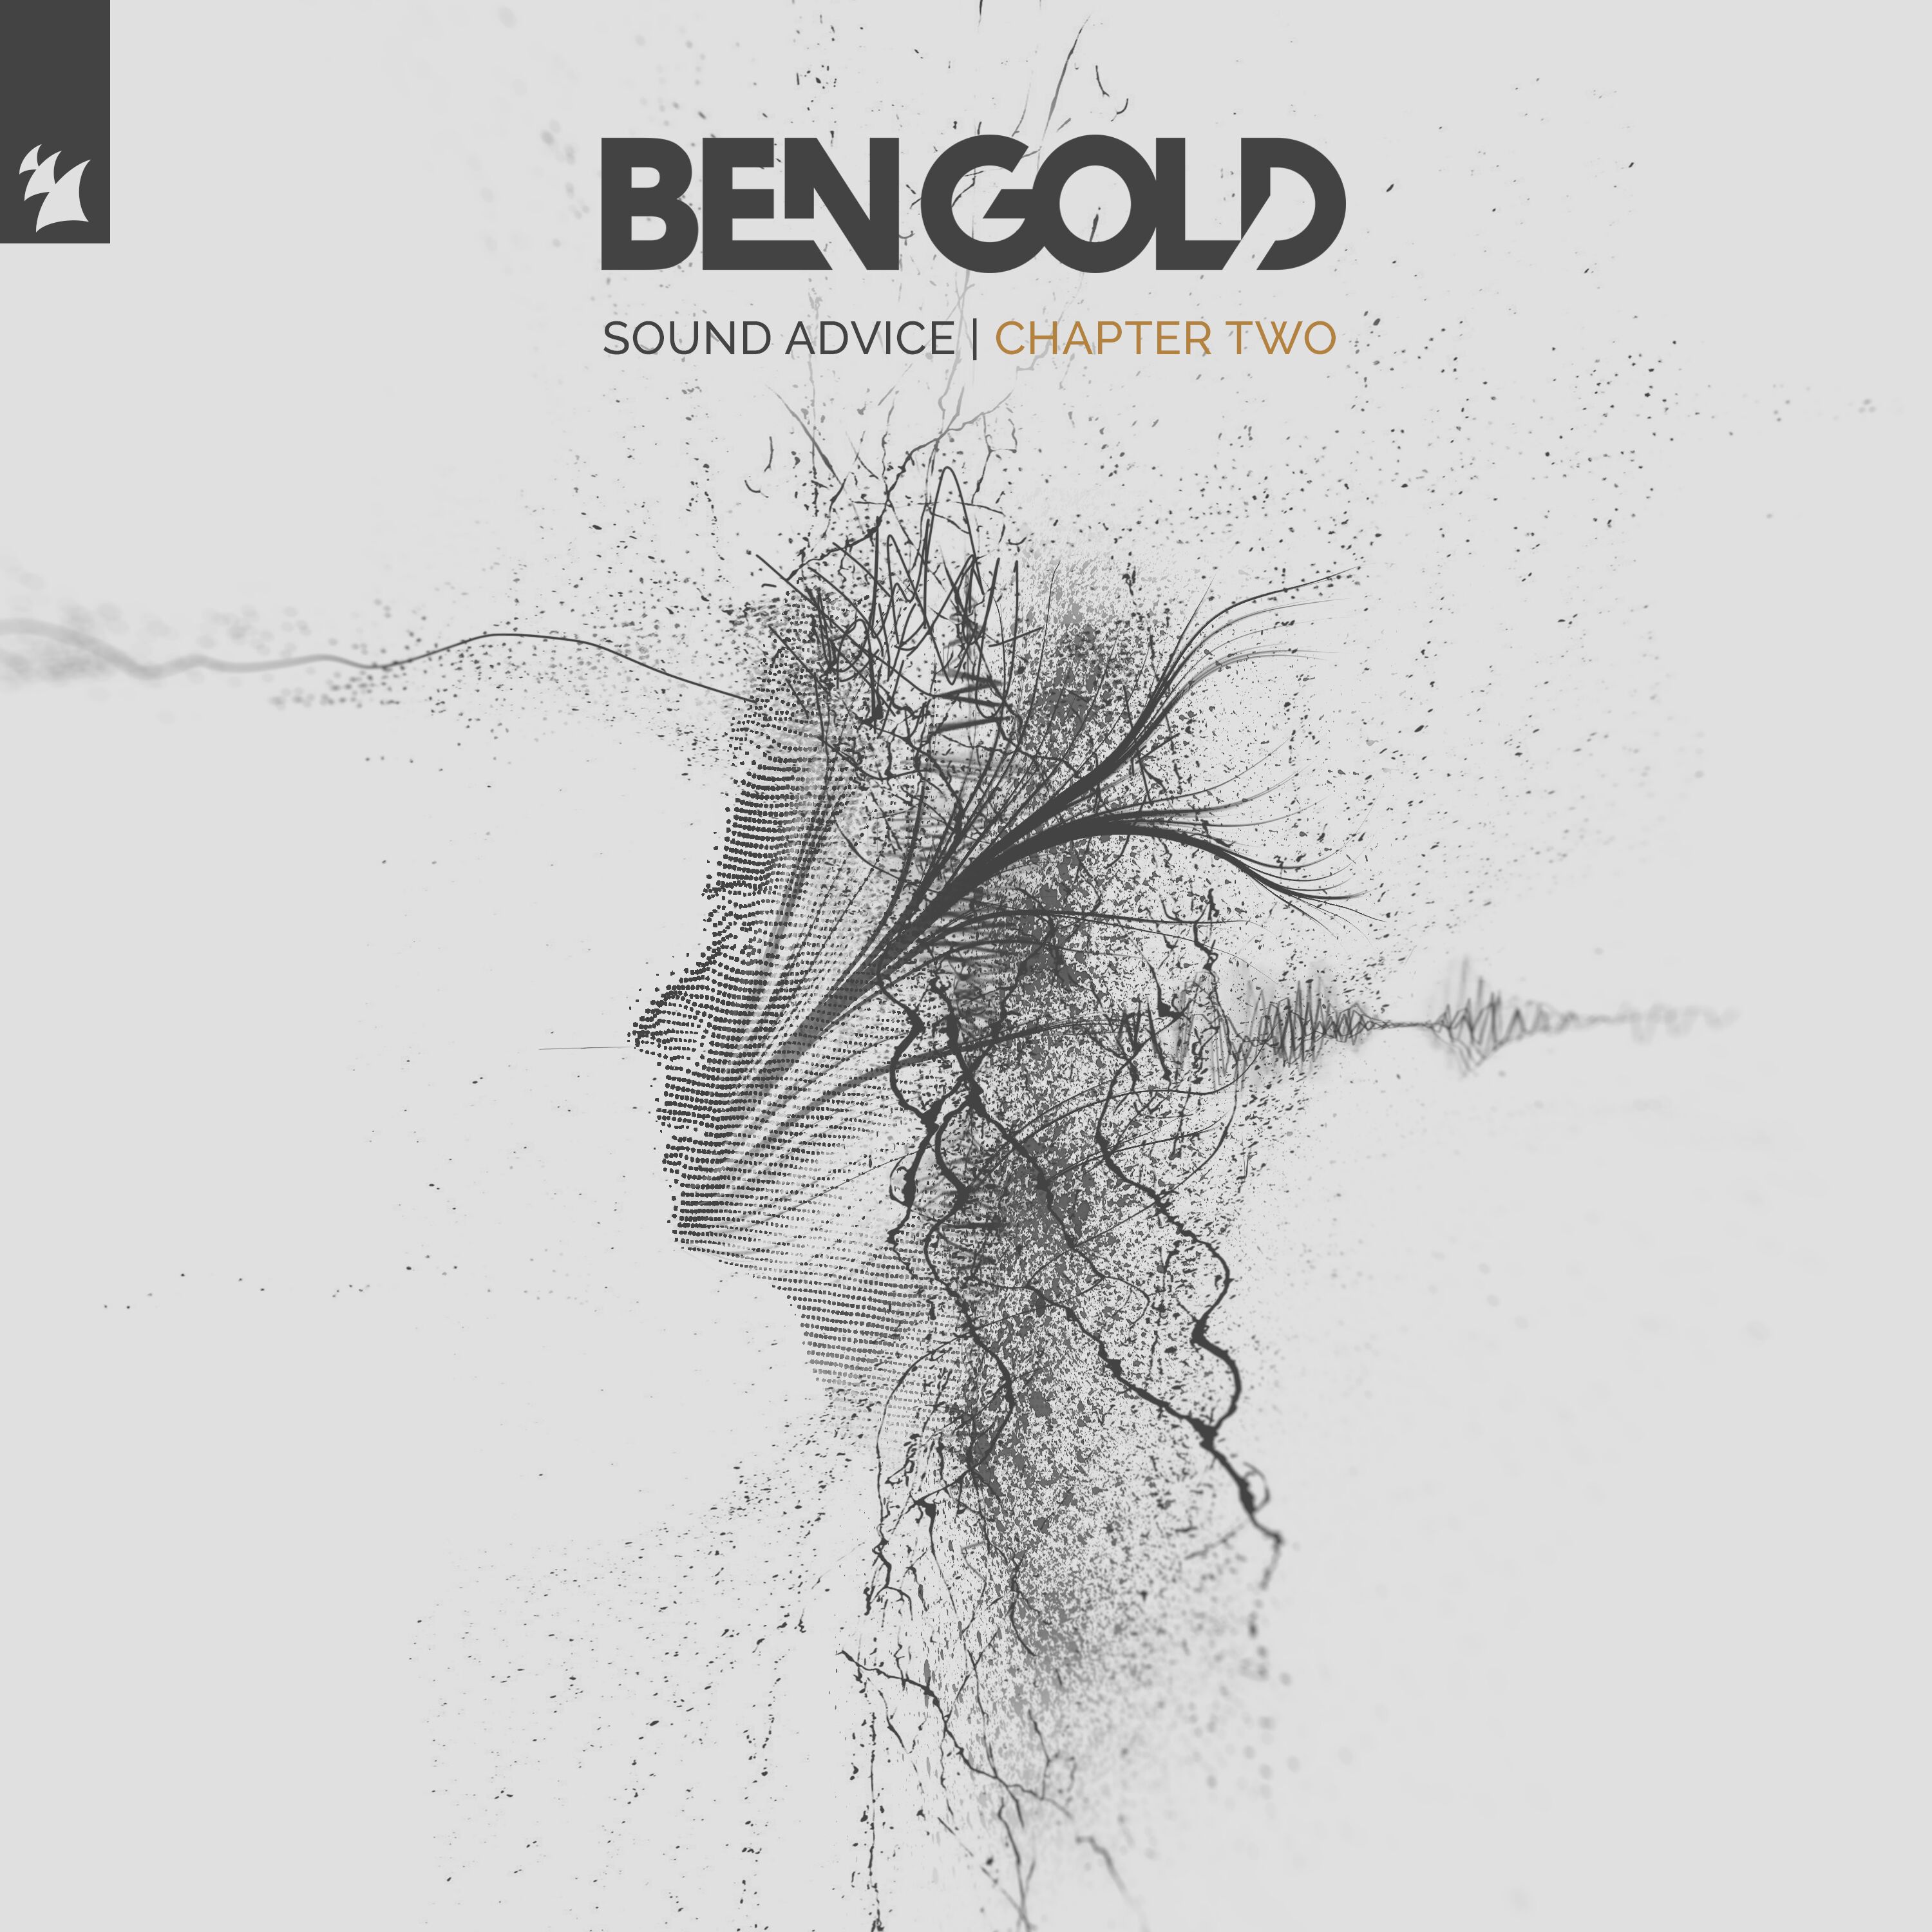 Ben Gold - Sound Advice Chapter Two